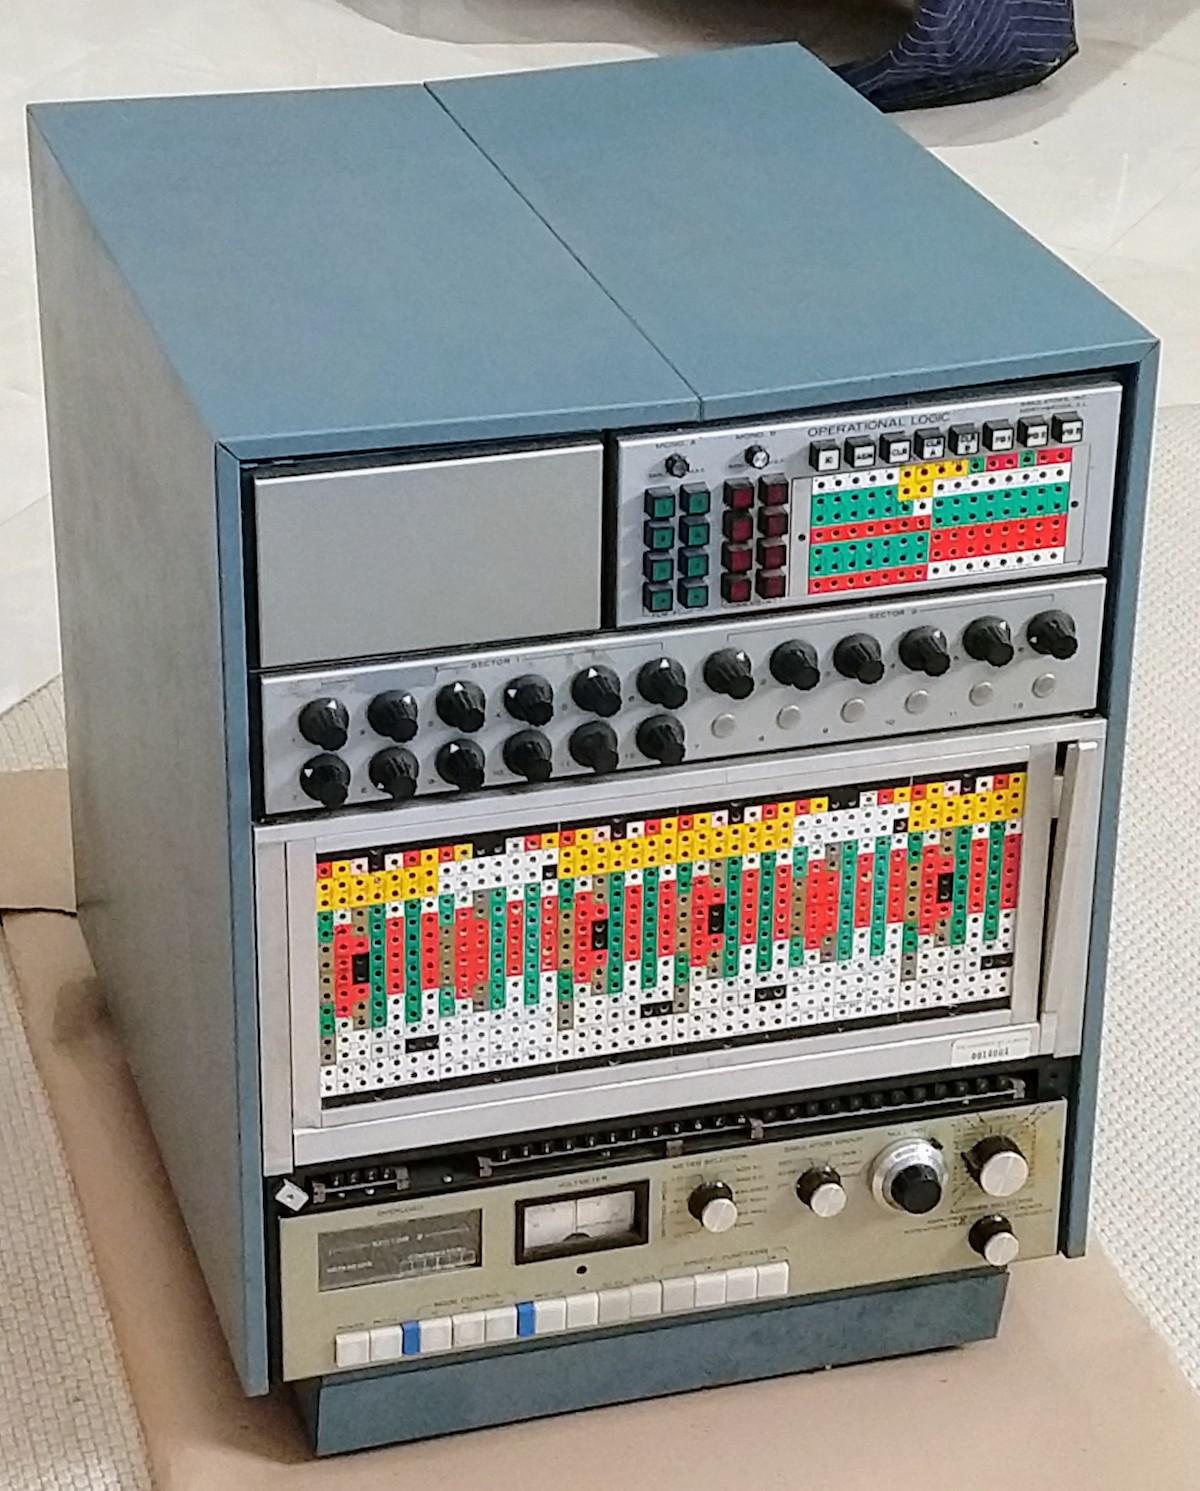 Reverse-engineering precision op amps from a 1969 analog computer